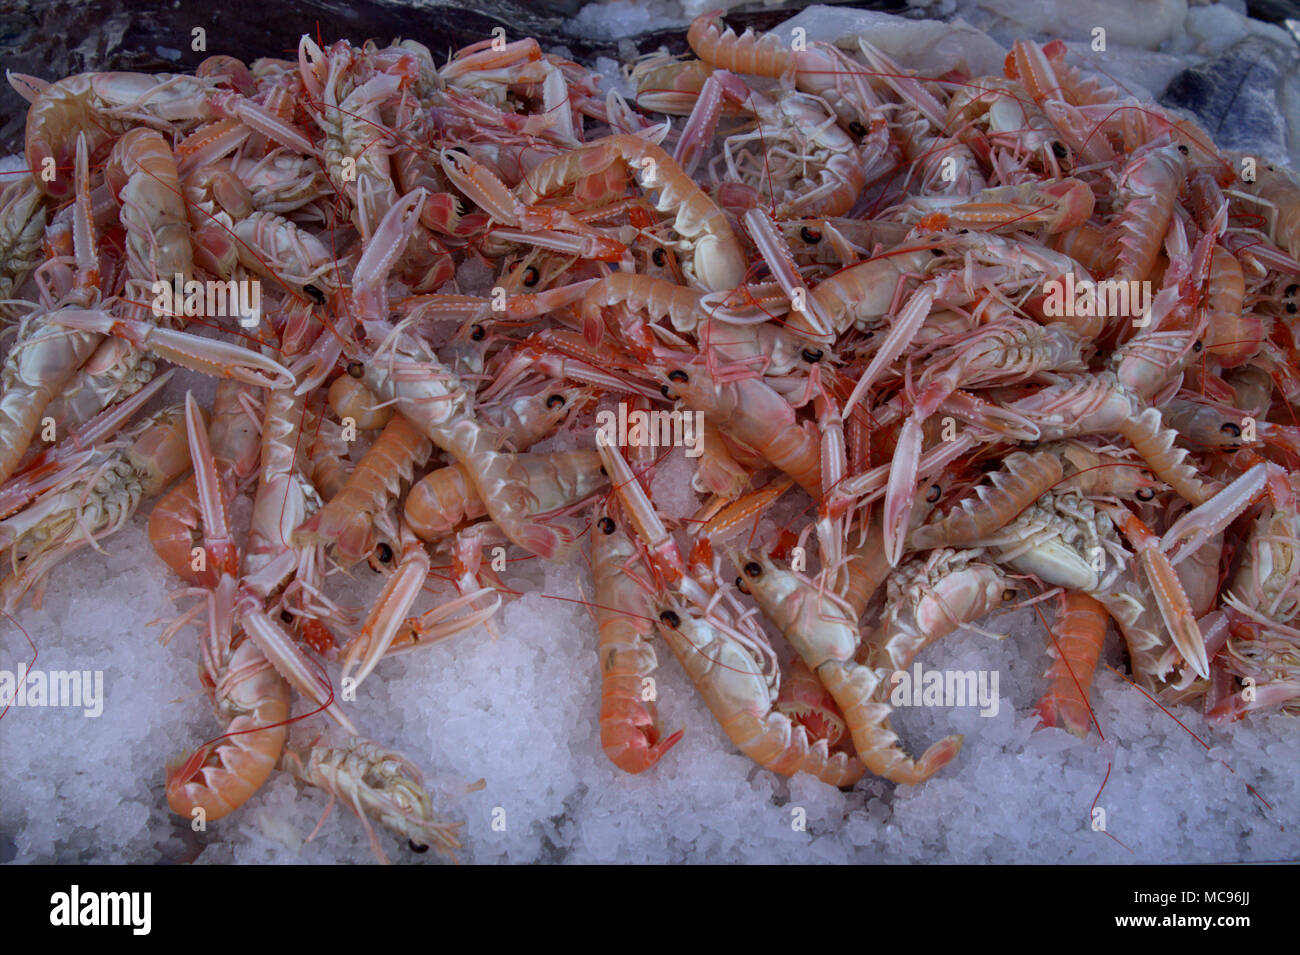 Nephrops norvegicus, langoustines, dublin bay prawns for sale on display on a bed of ice. Stock Photo